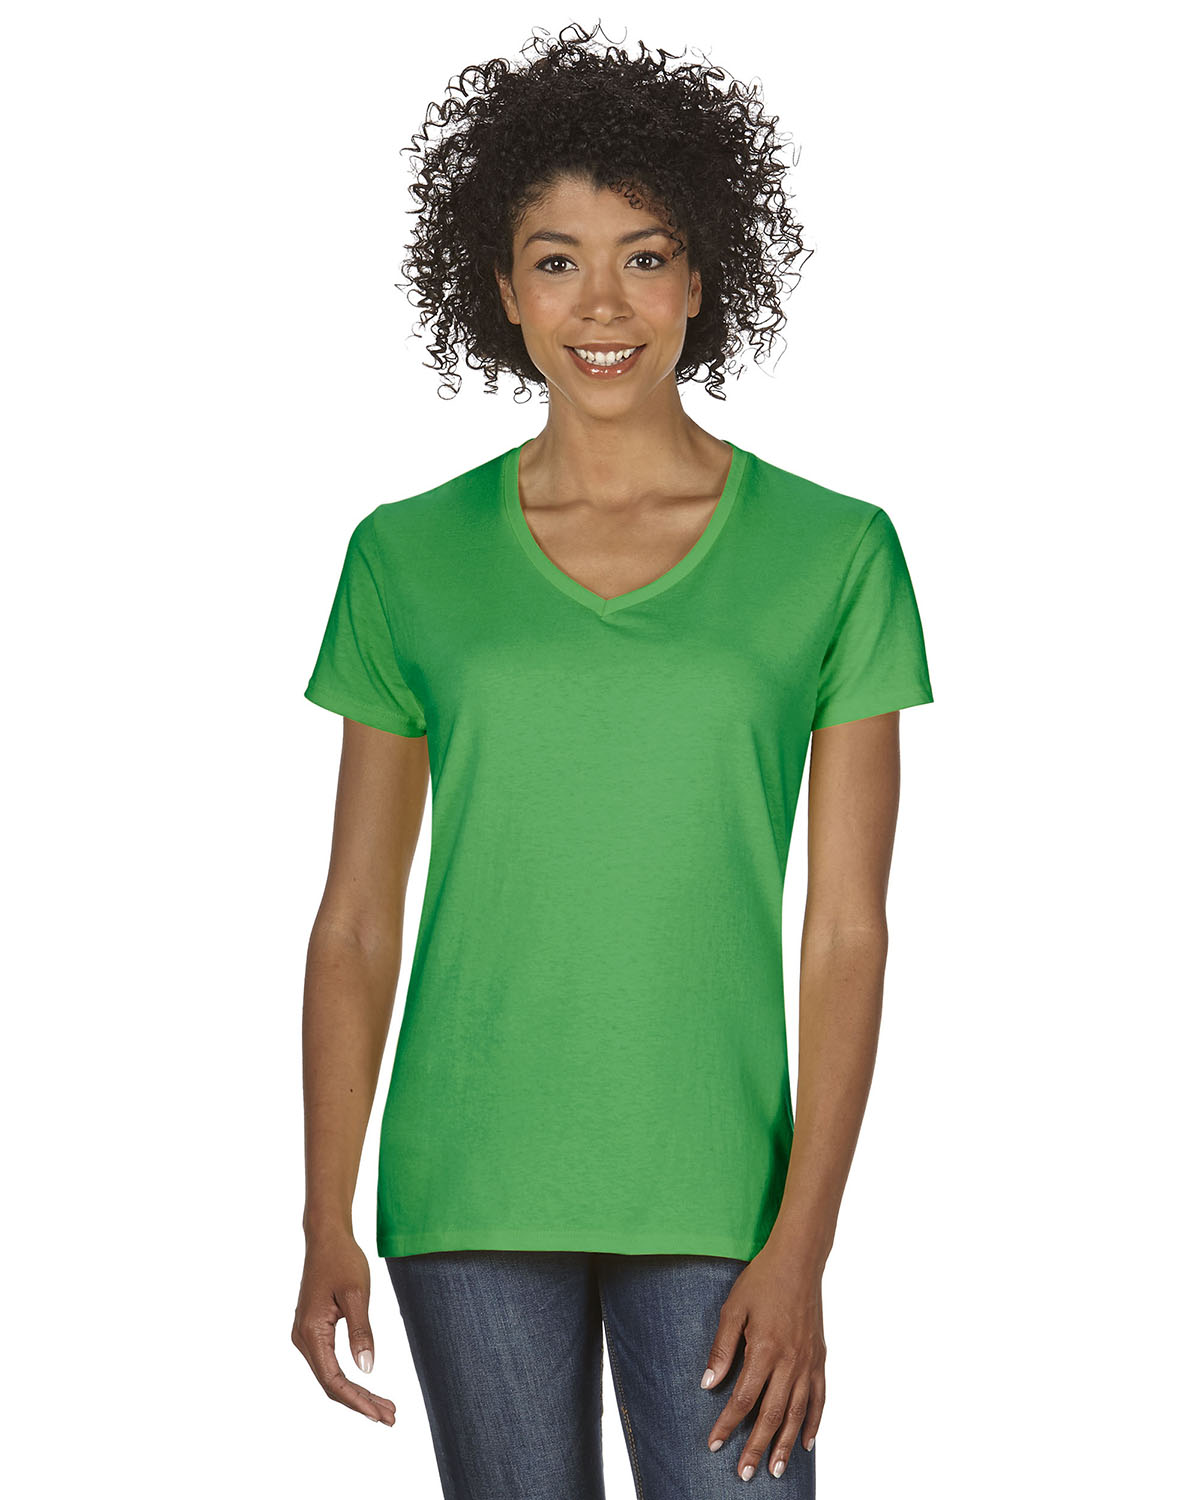 XERSION WOMENS Green- V-NECK T-SHIRT SIZE Small- NWOT